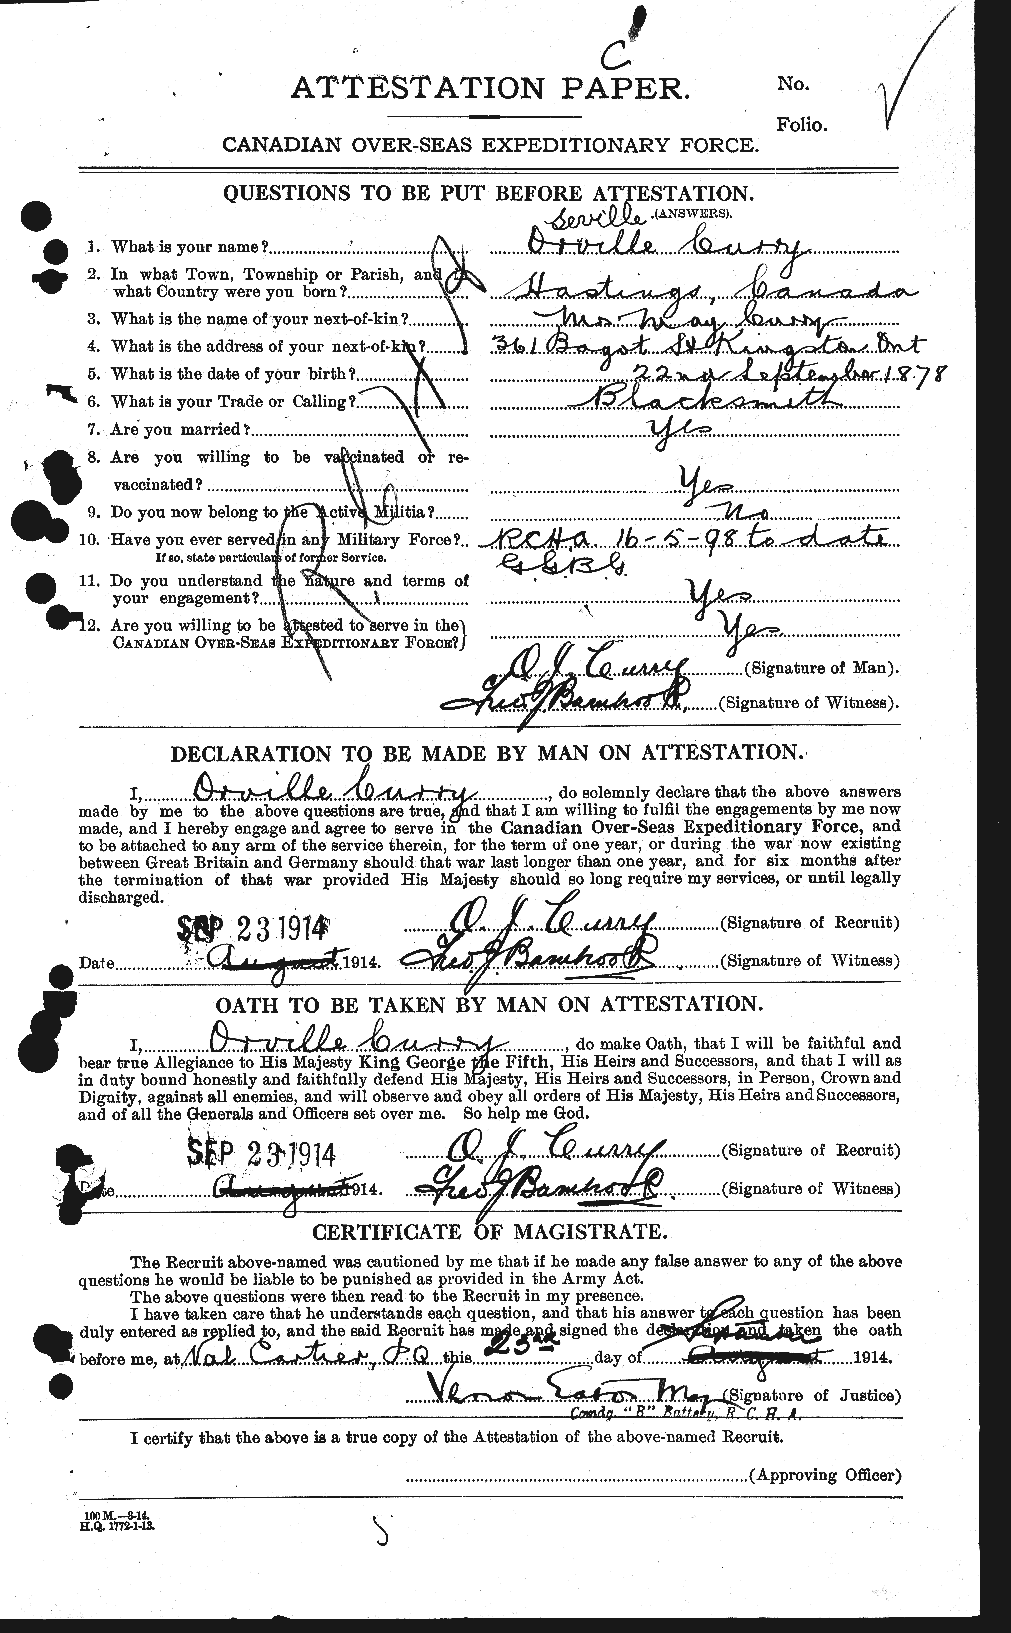 Personnel Records of the First World War - CEF 070960a